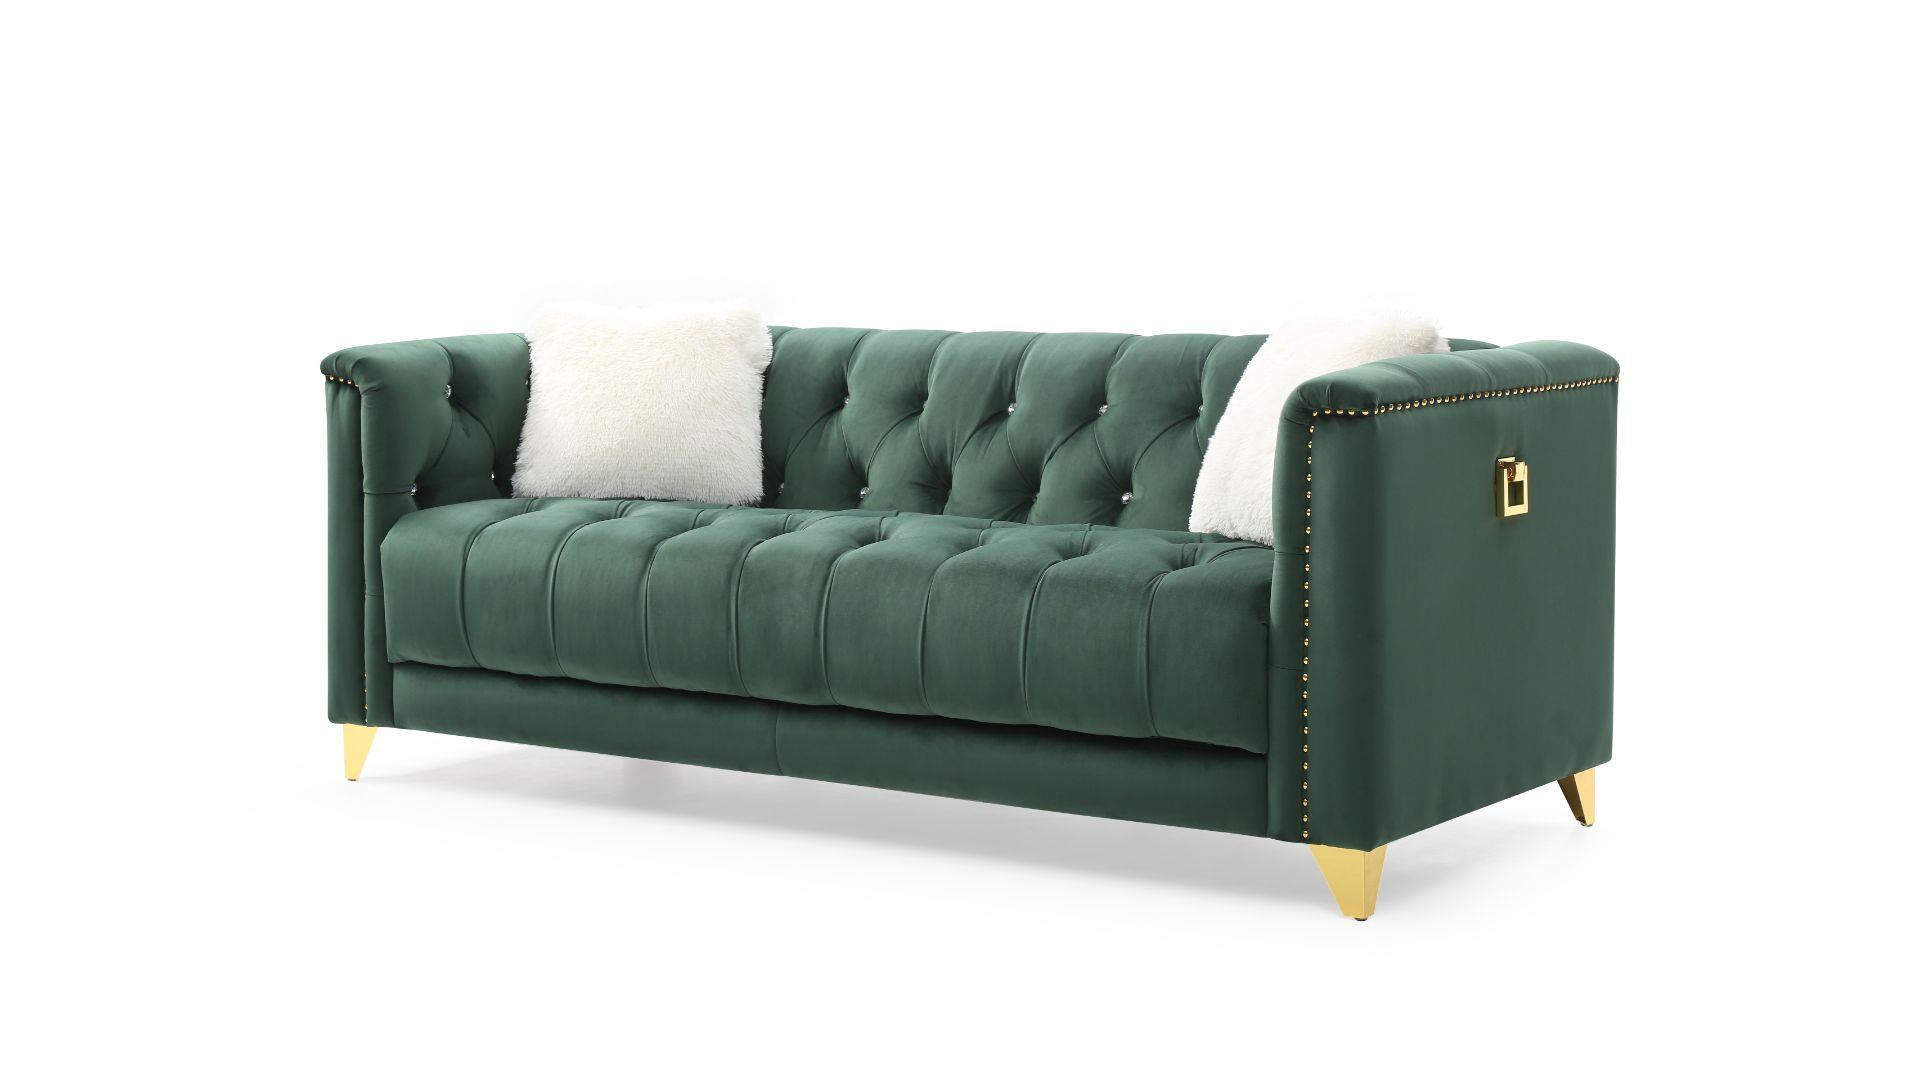 Contemporary, Modern Sofa RUSSELL 733569393855 in Green Fabric